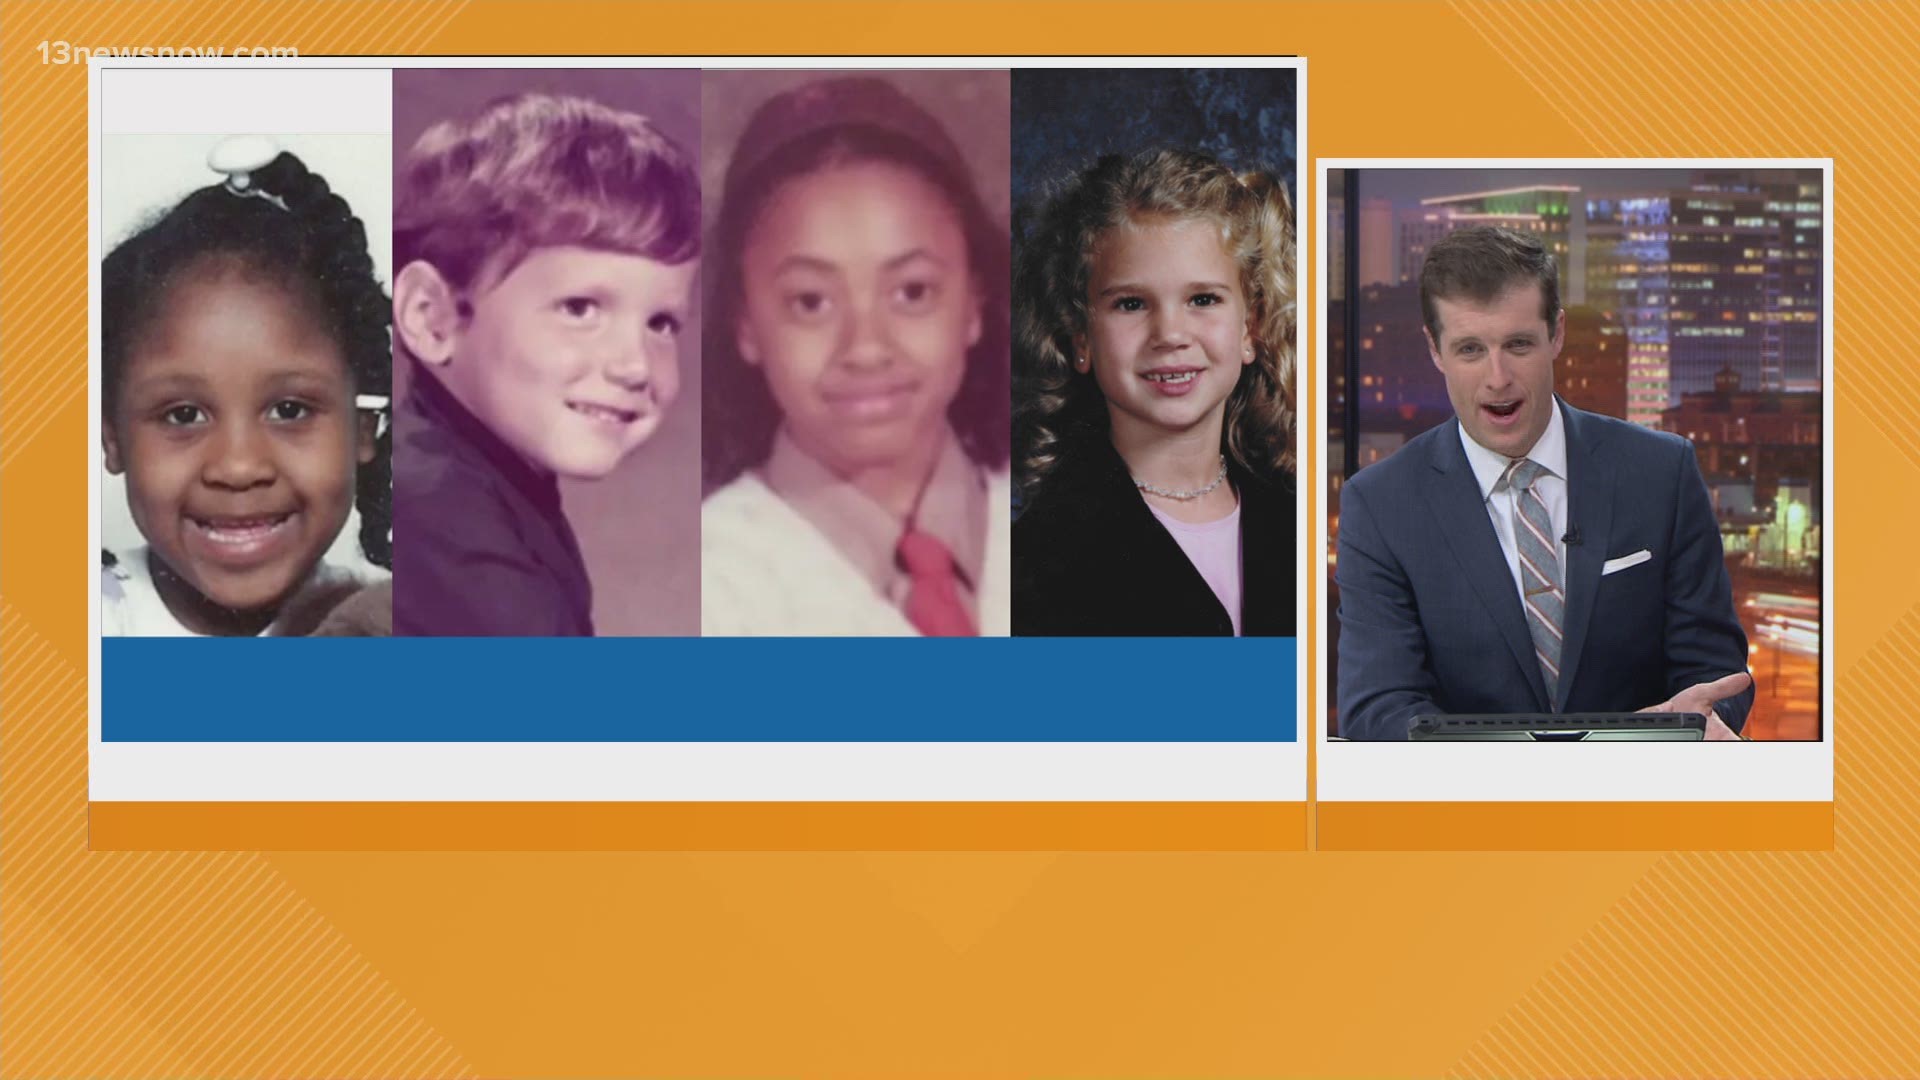 Bethany Reese showed anchor Dan Kennedy a few school pictures from 13News staff members! Can you guess as well as him, who's who?